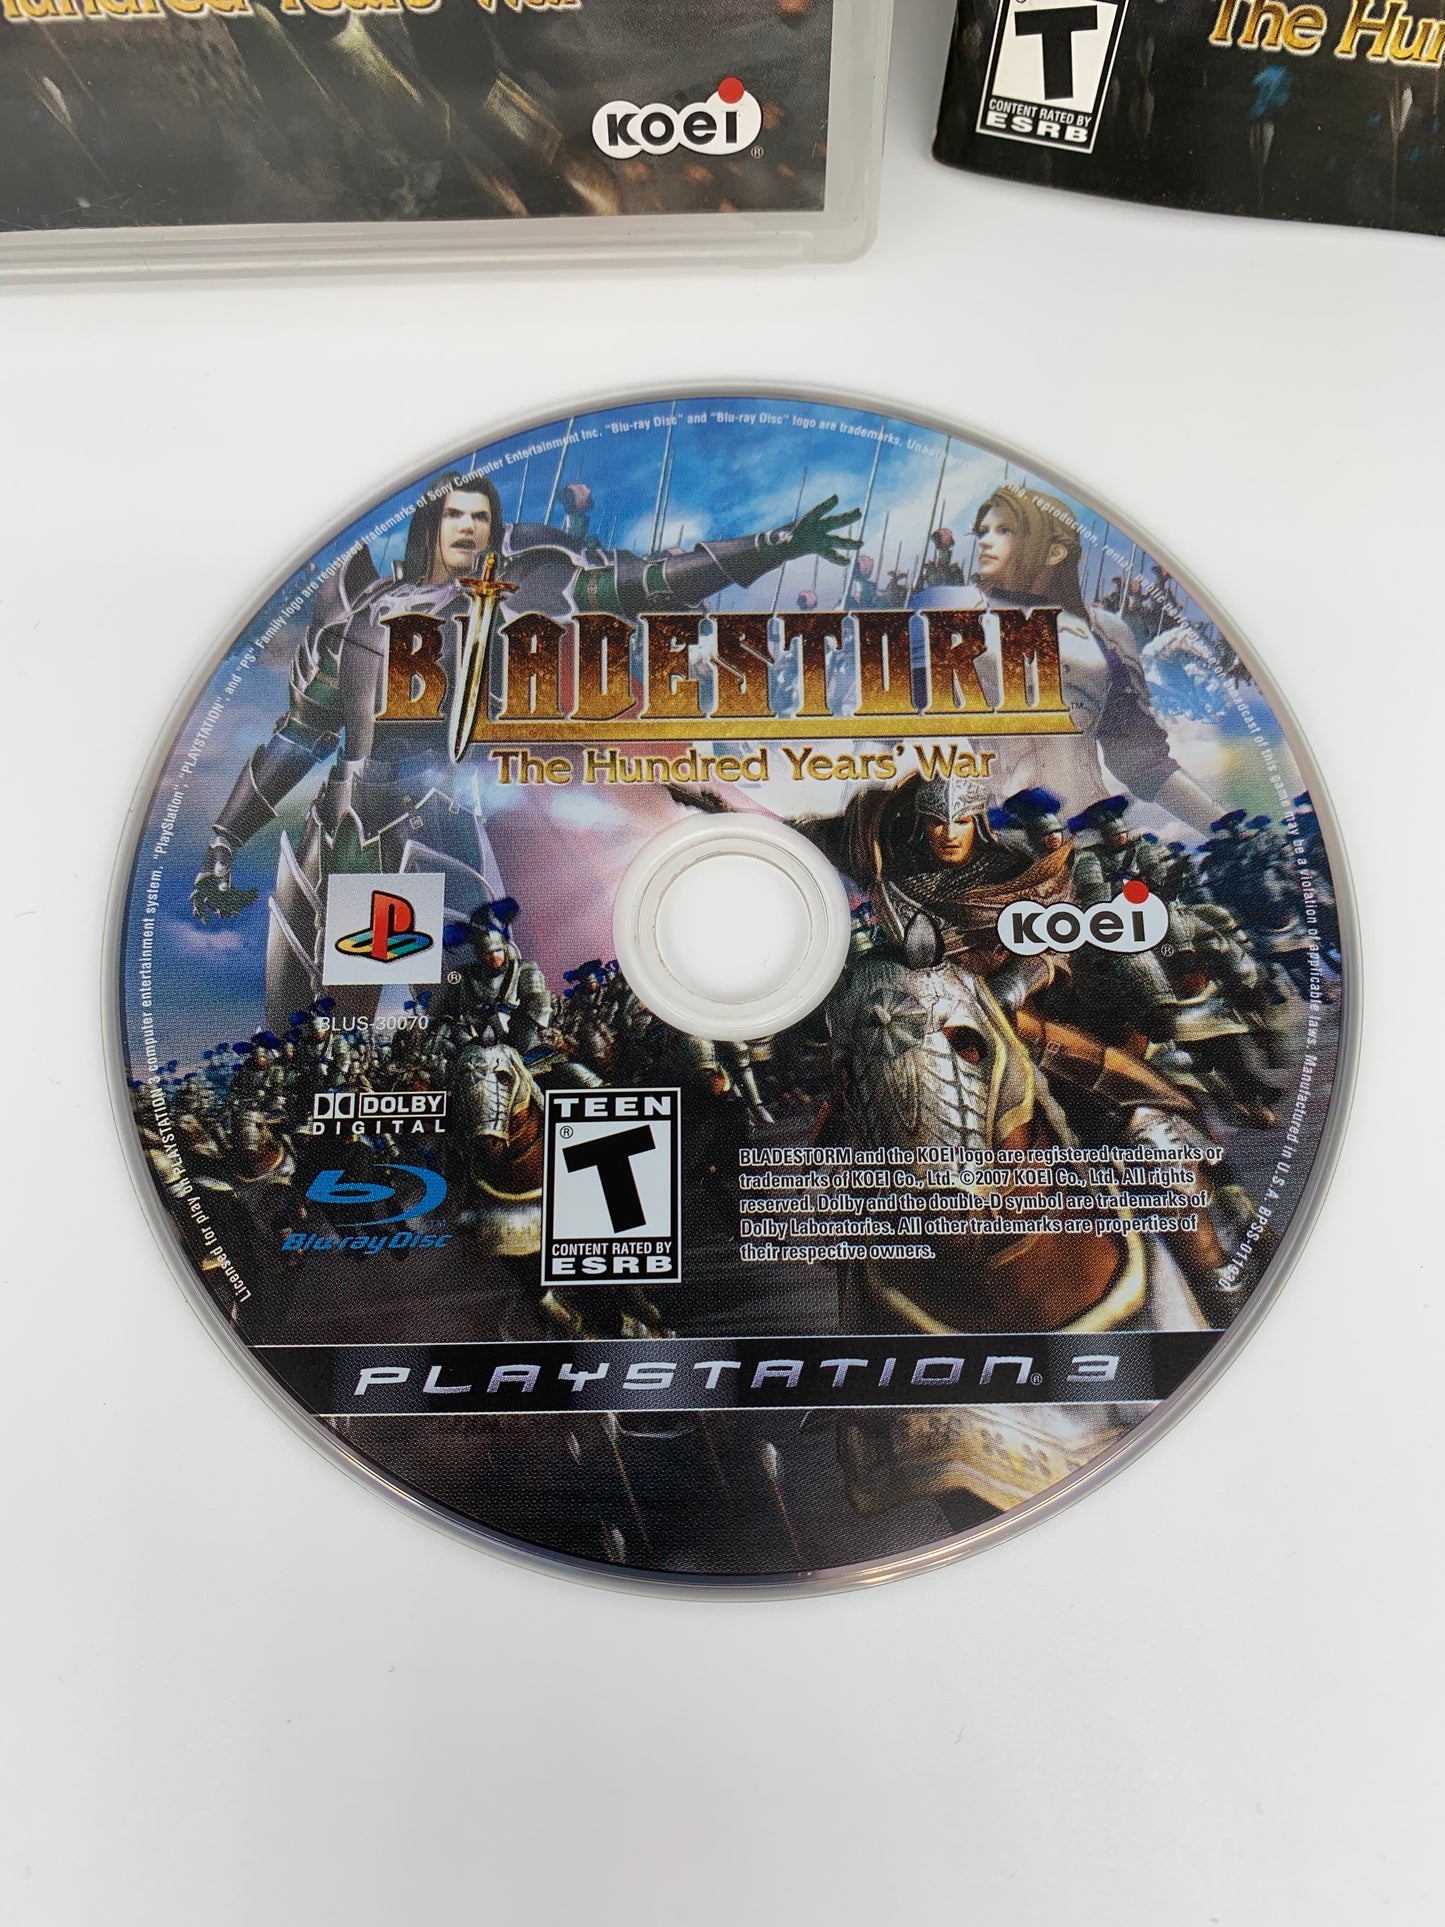 SONY PLAYSTATiON 3 [PS3] | BLADESTORM THE HUNDRED YEARS WAR